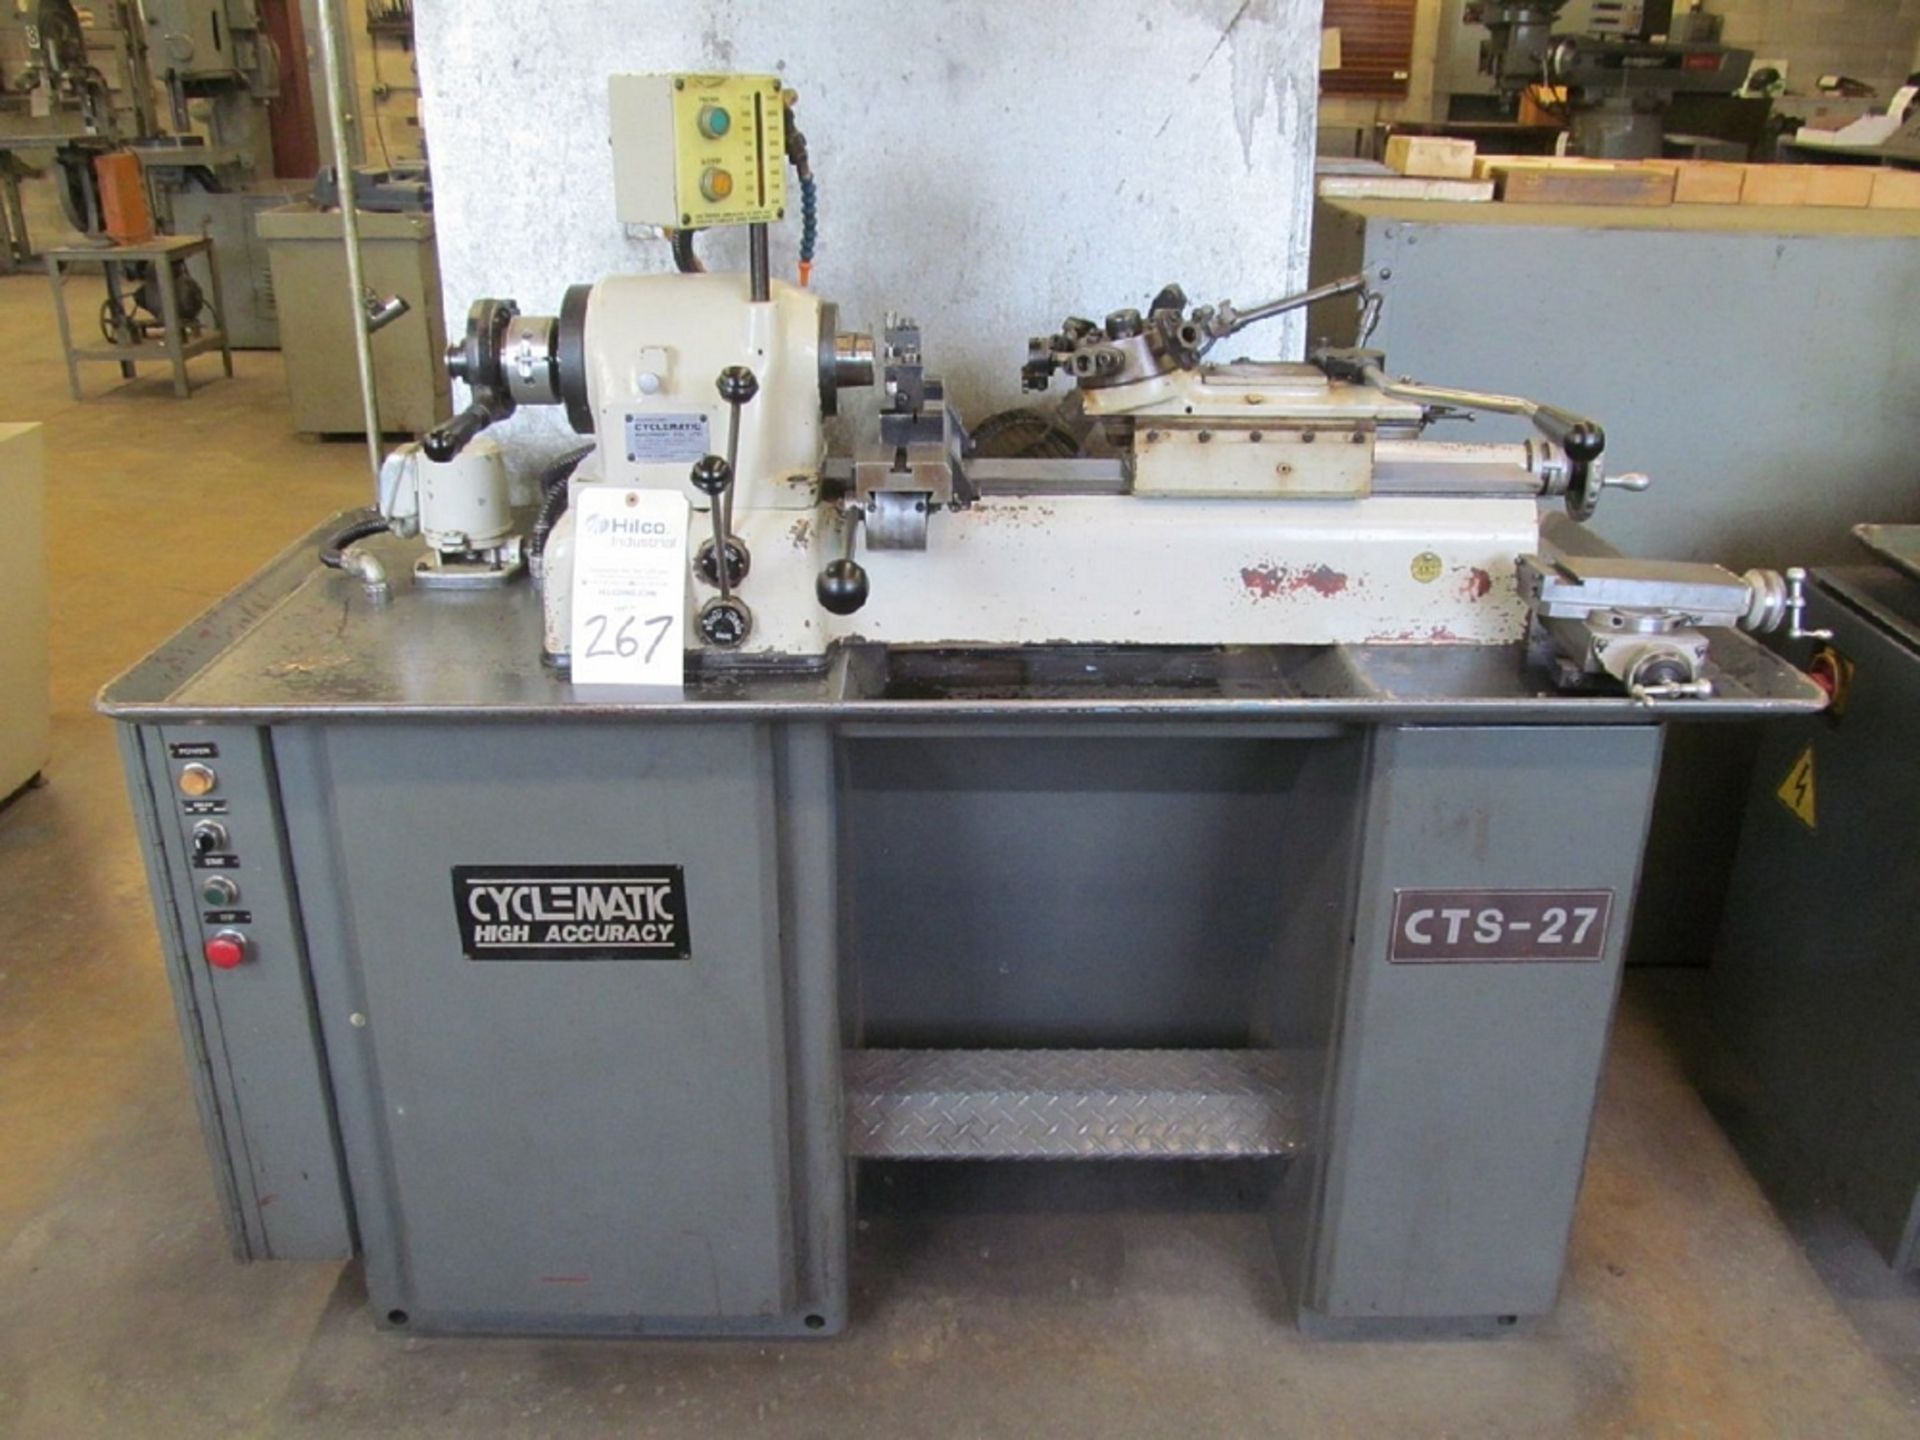 Cyclematic Model CTS-27 9" Tool Room Turret Lathe - Image 3 of 4